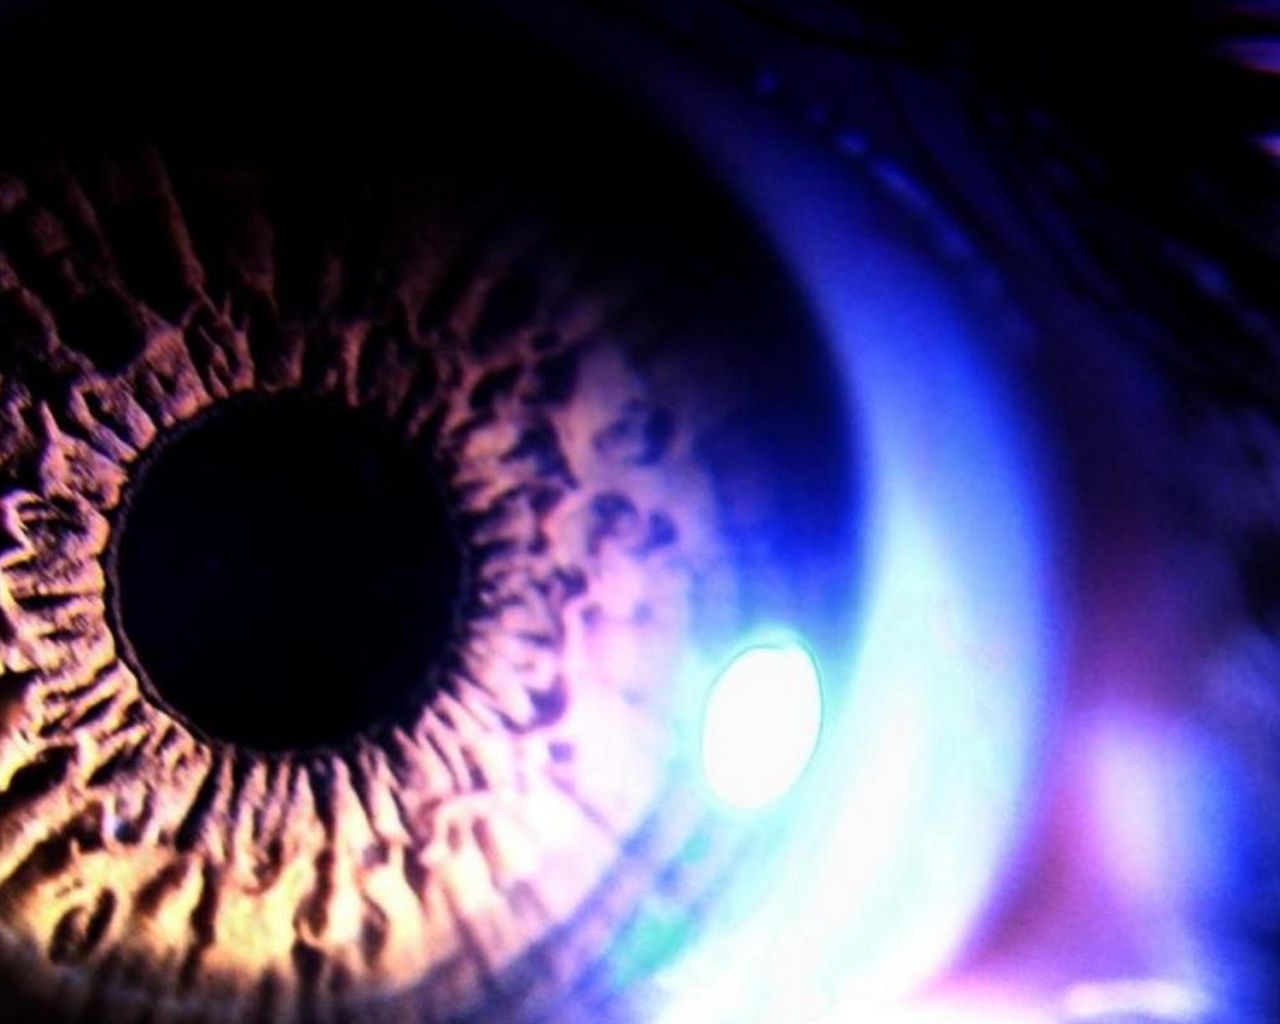 Reflection of neon in the pupil